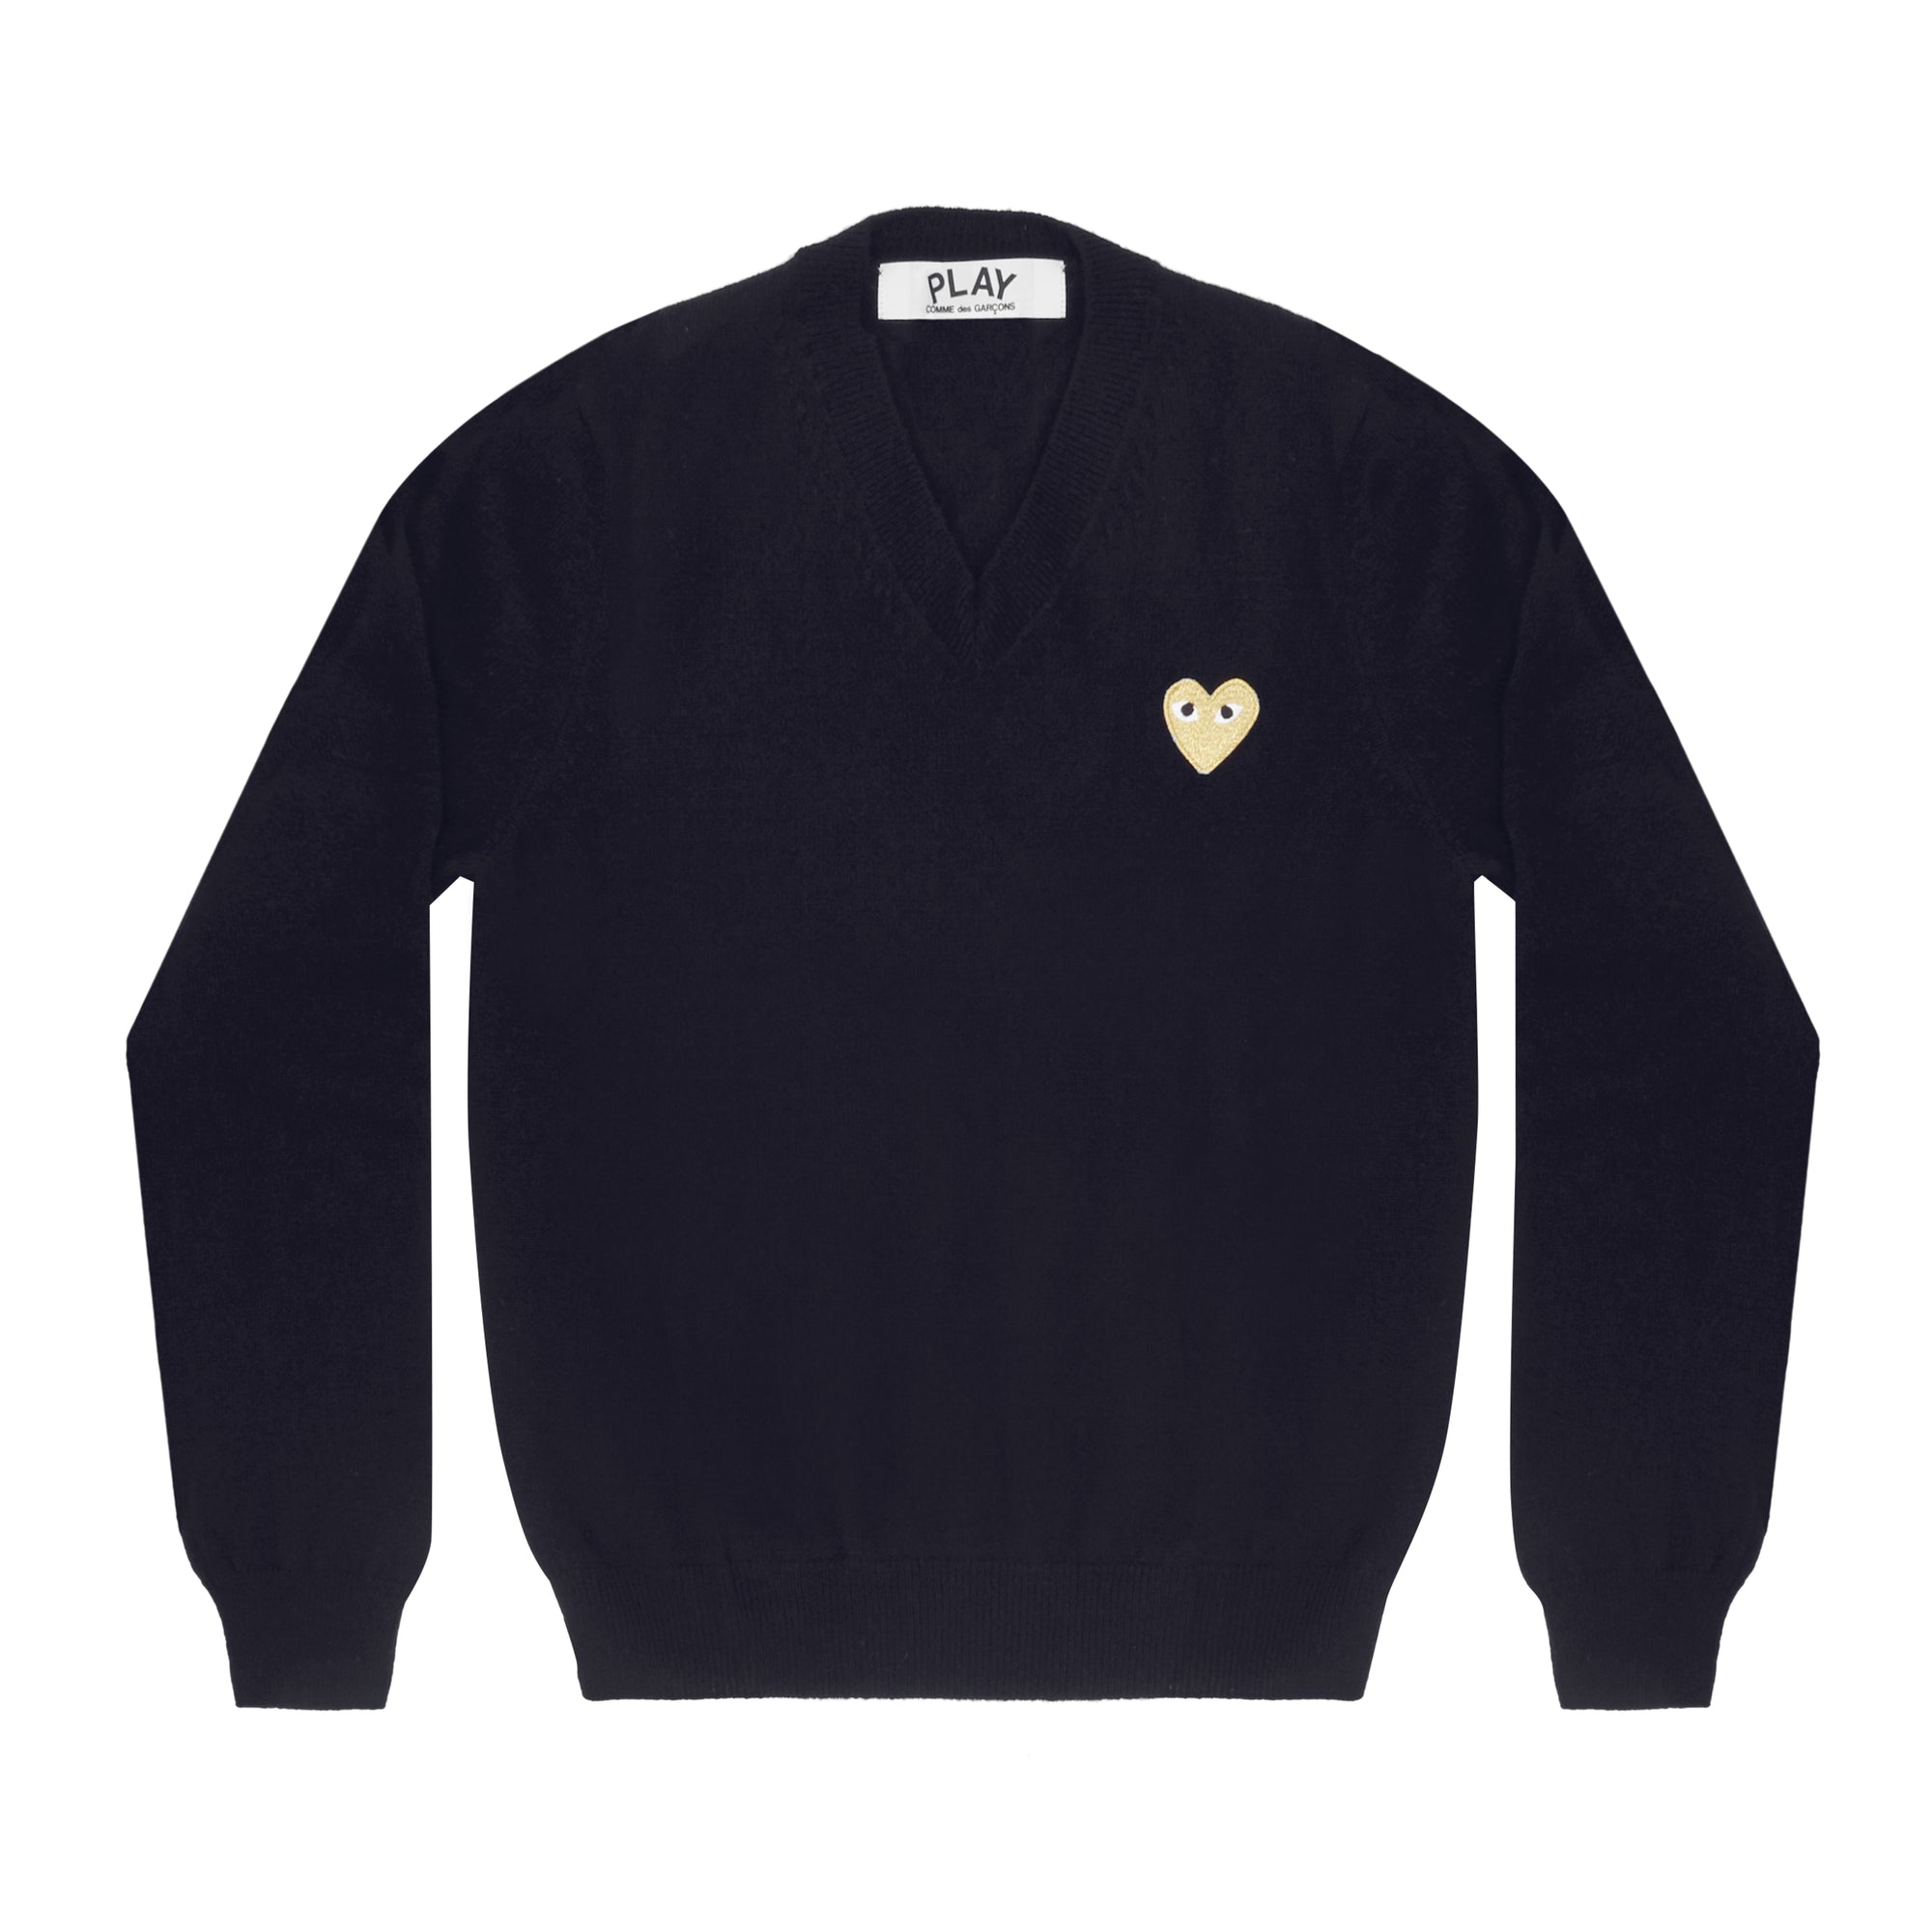 PLAY CDG - GOLD HEART V NECK SWEATER - (NAVY) view 1